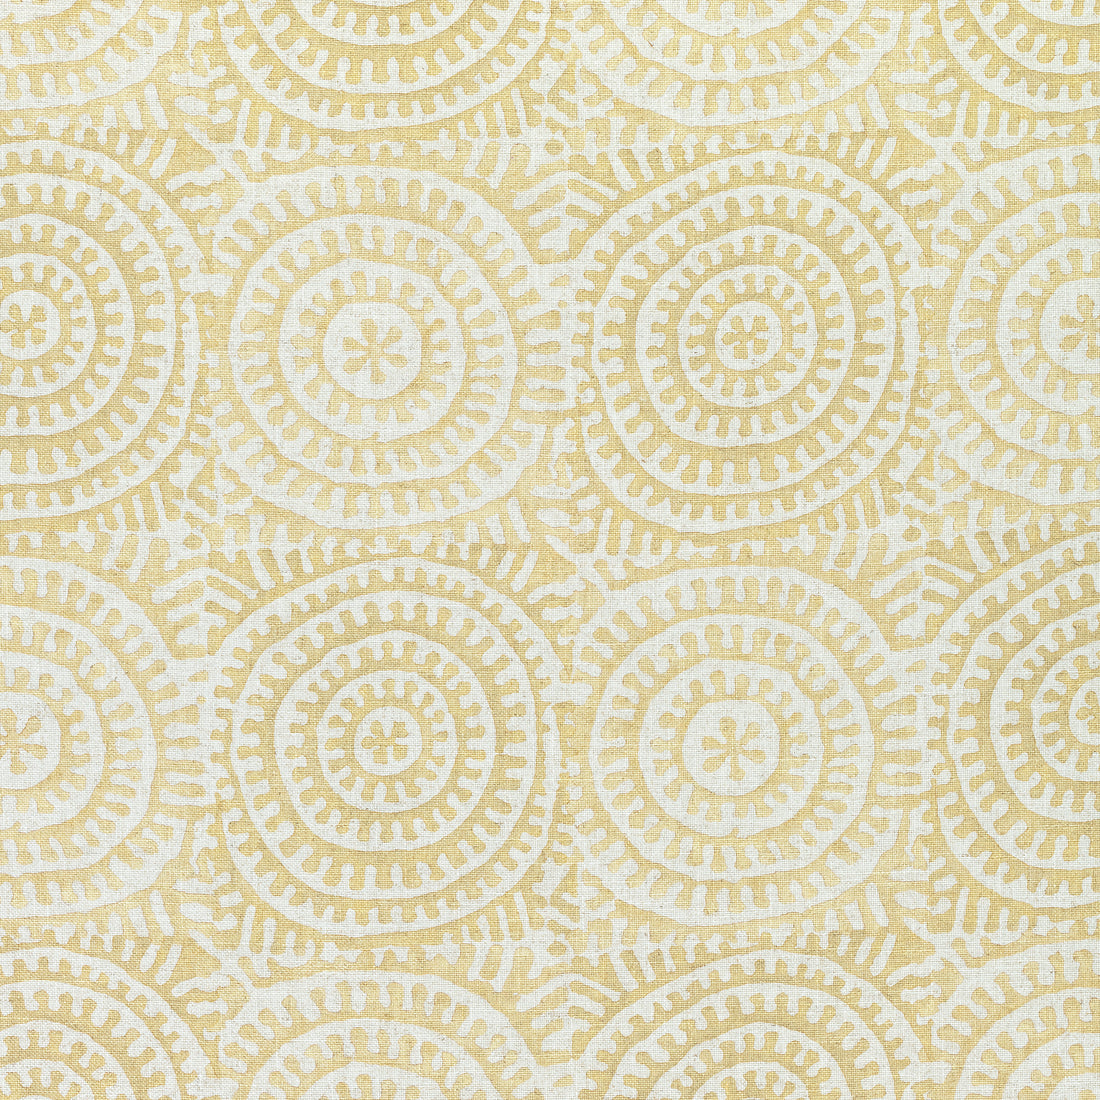 Kasai fabric in harvest gold color - pattern number F92933 - by Thibaut in the Paramount collection